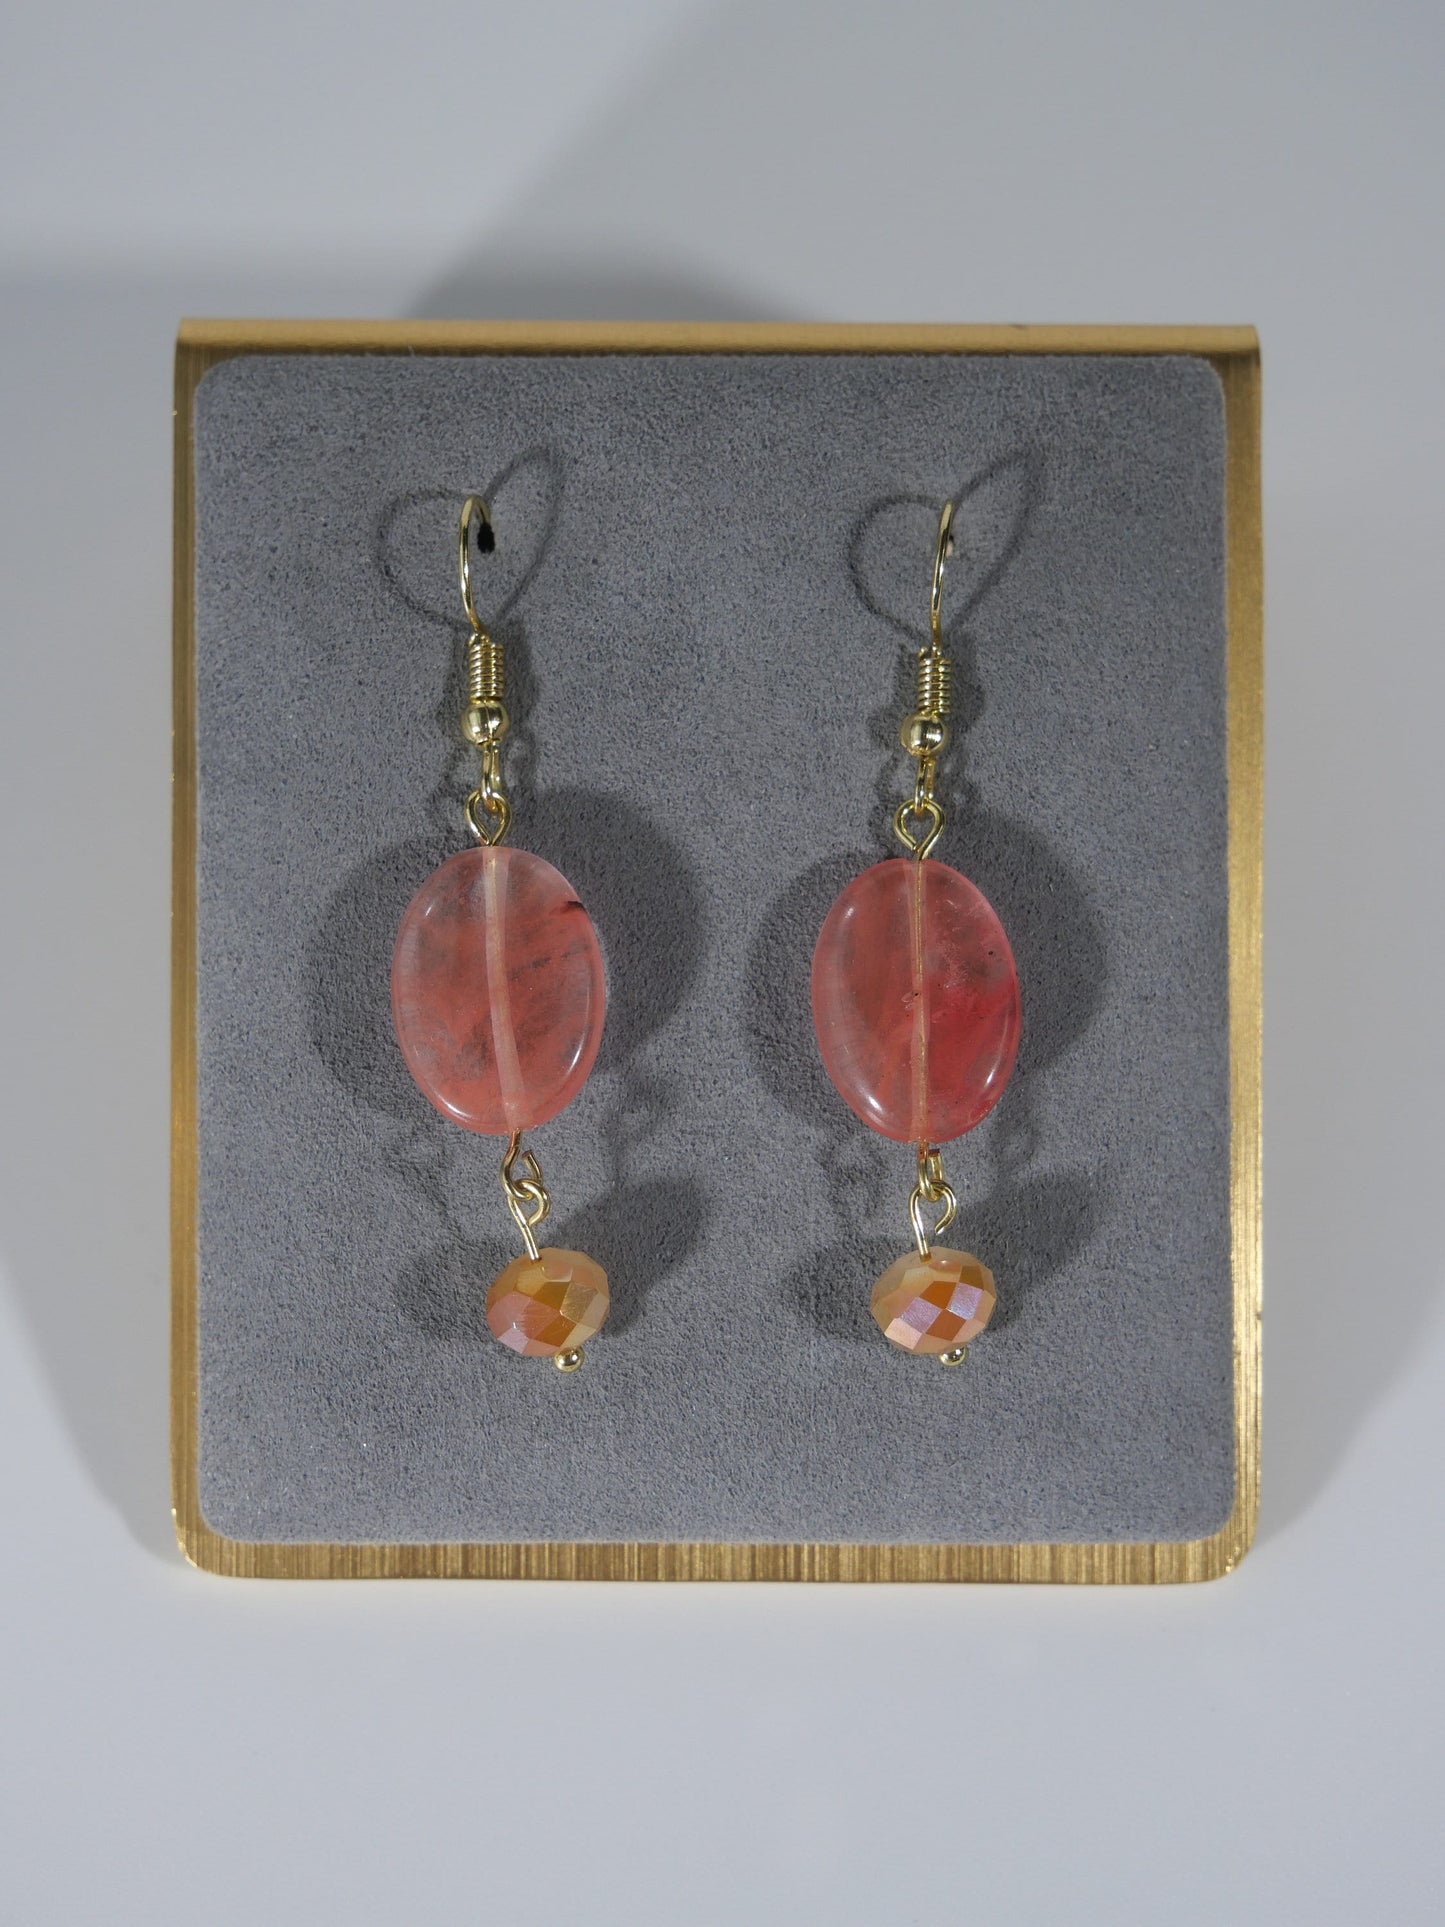 Gold, Pink Agate Dangle Earrings, Hypoallergenic, Made in Maine, Inspired by Maine